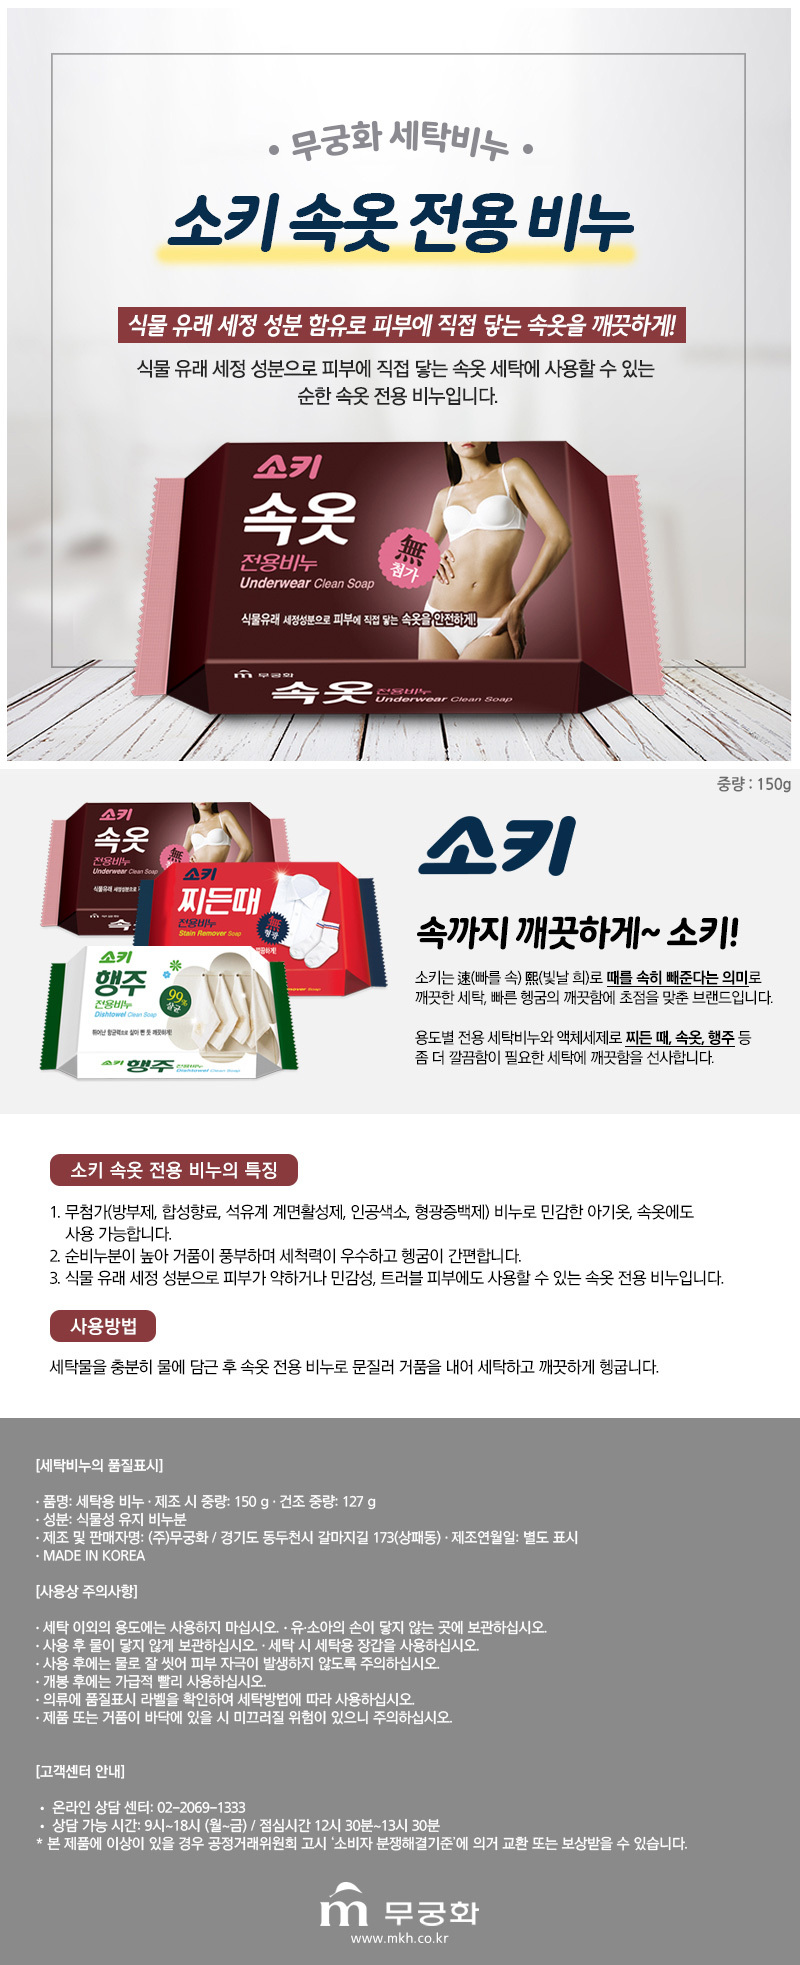 No Brand Korean Products - Laundry Soap for Underwear